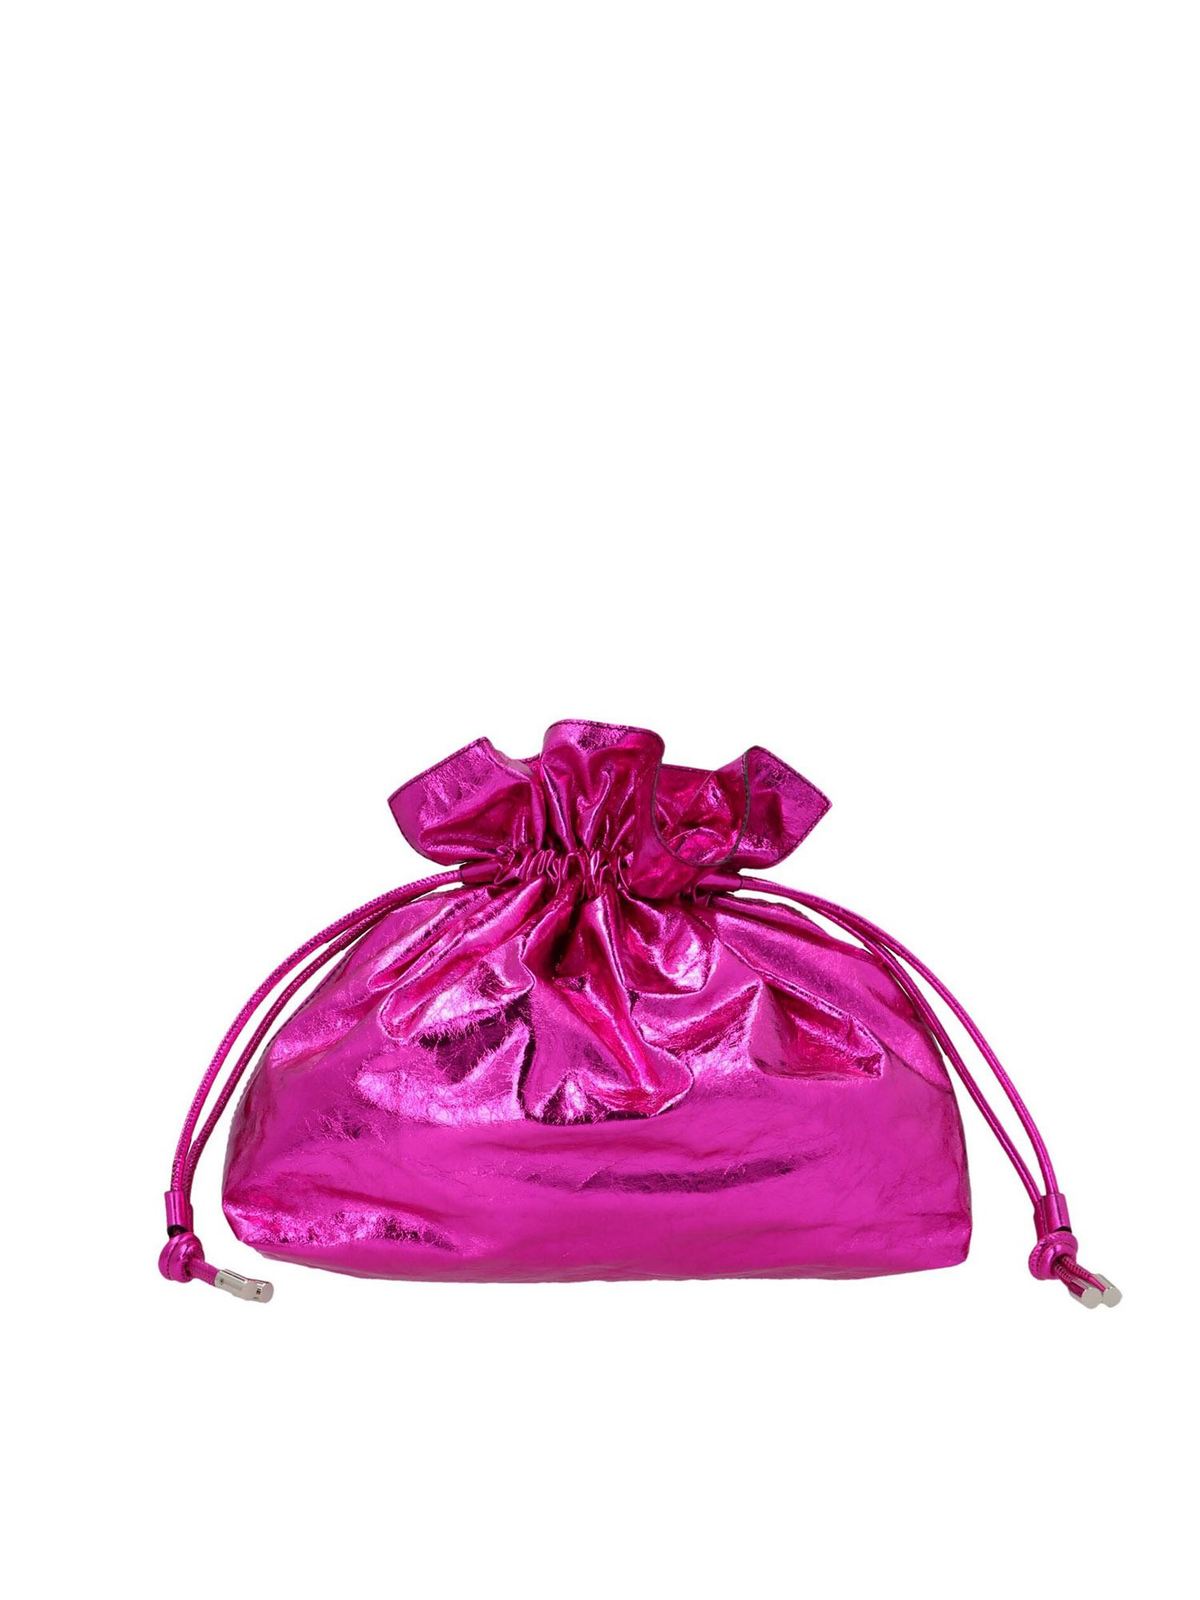 ISABEL MARANT AILEY POUCH IN FUCHSIA